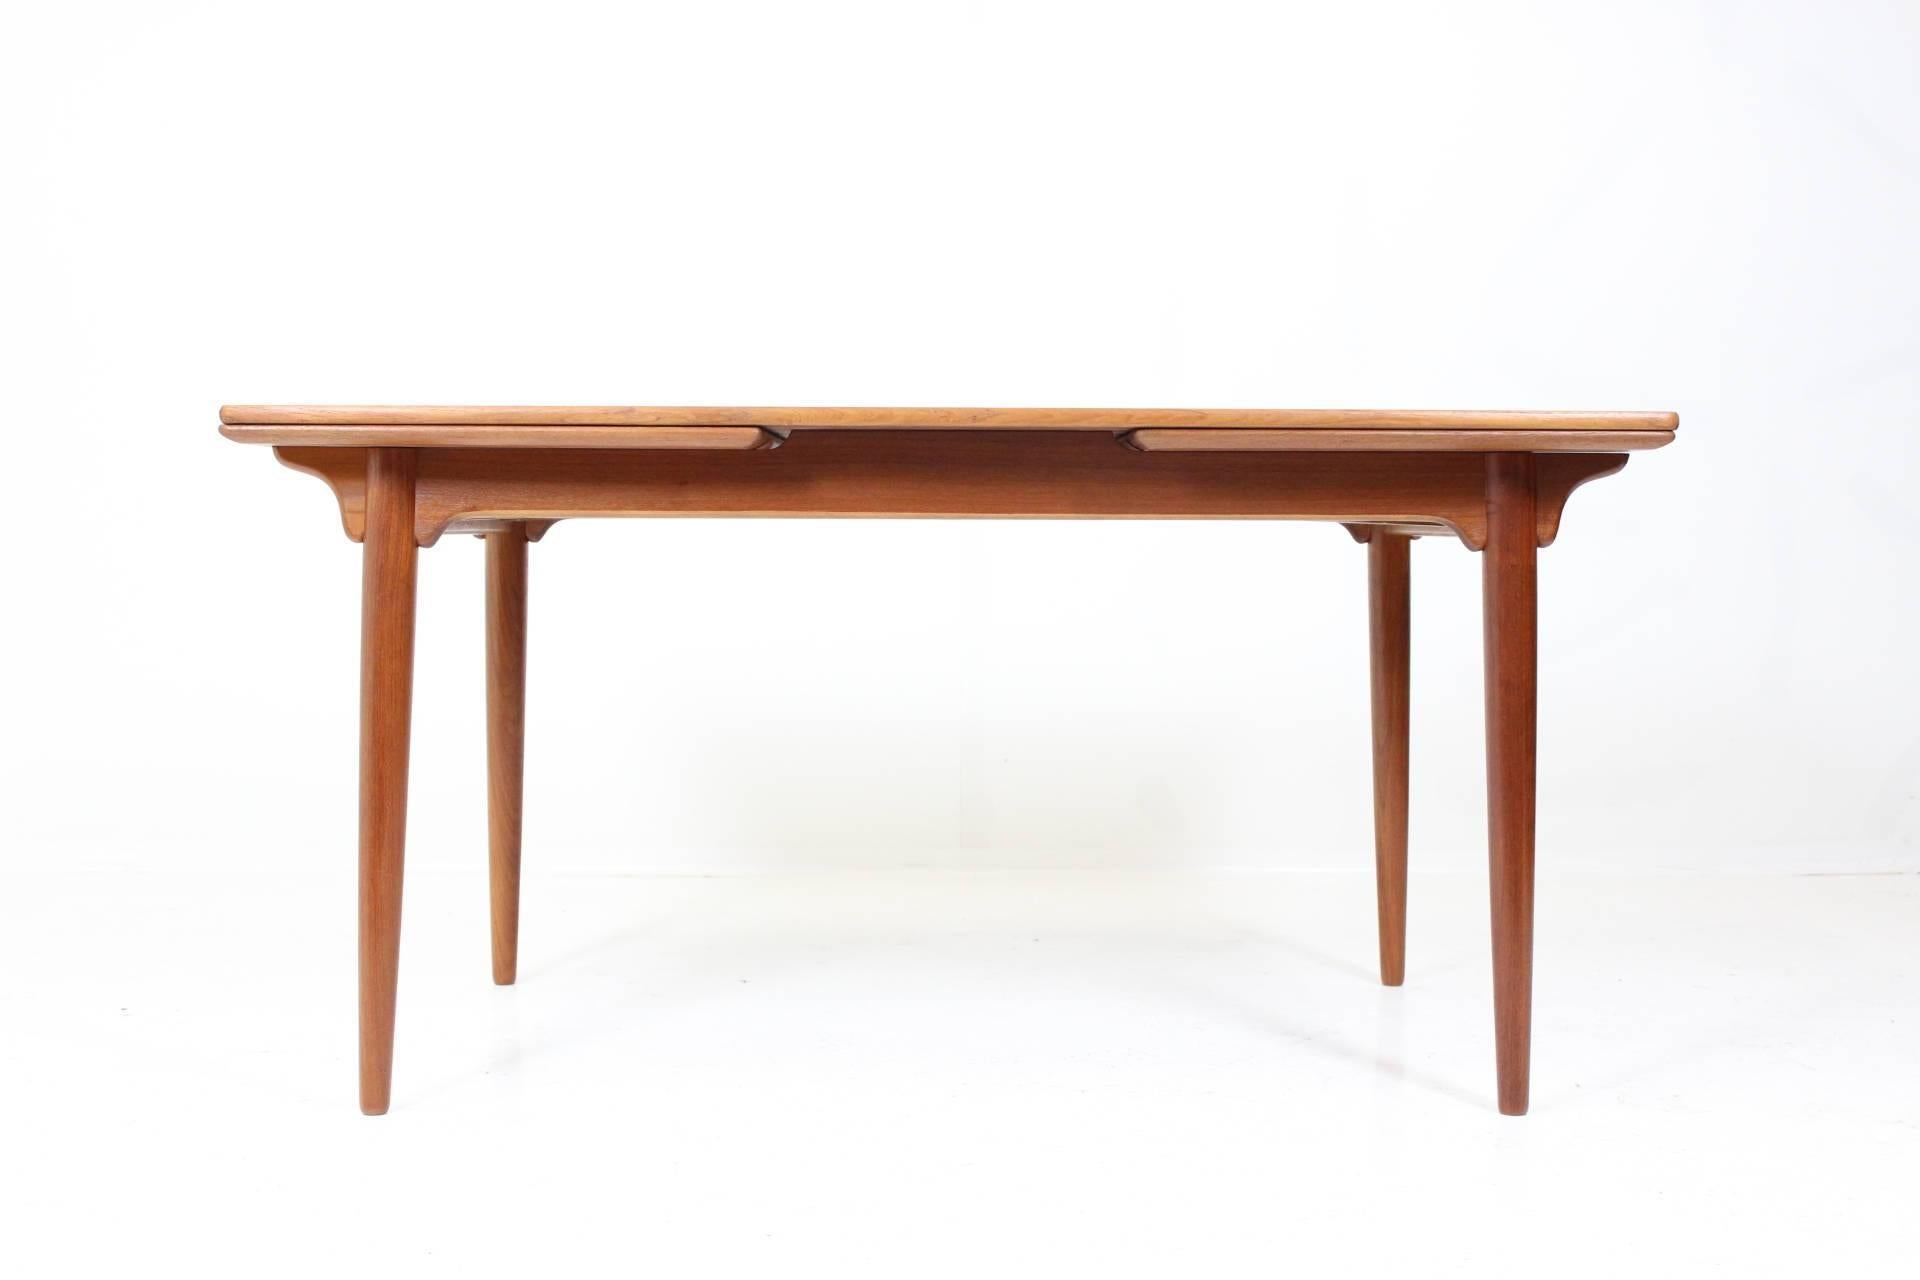 Dining table in teak by Gunni Omann with two extendable leaves (up to 253cm width). Model 54. Manufactured by Omann Jun. The item was carefully restored and it's in perfect condition.